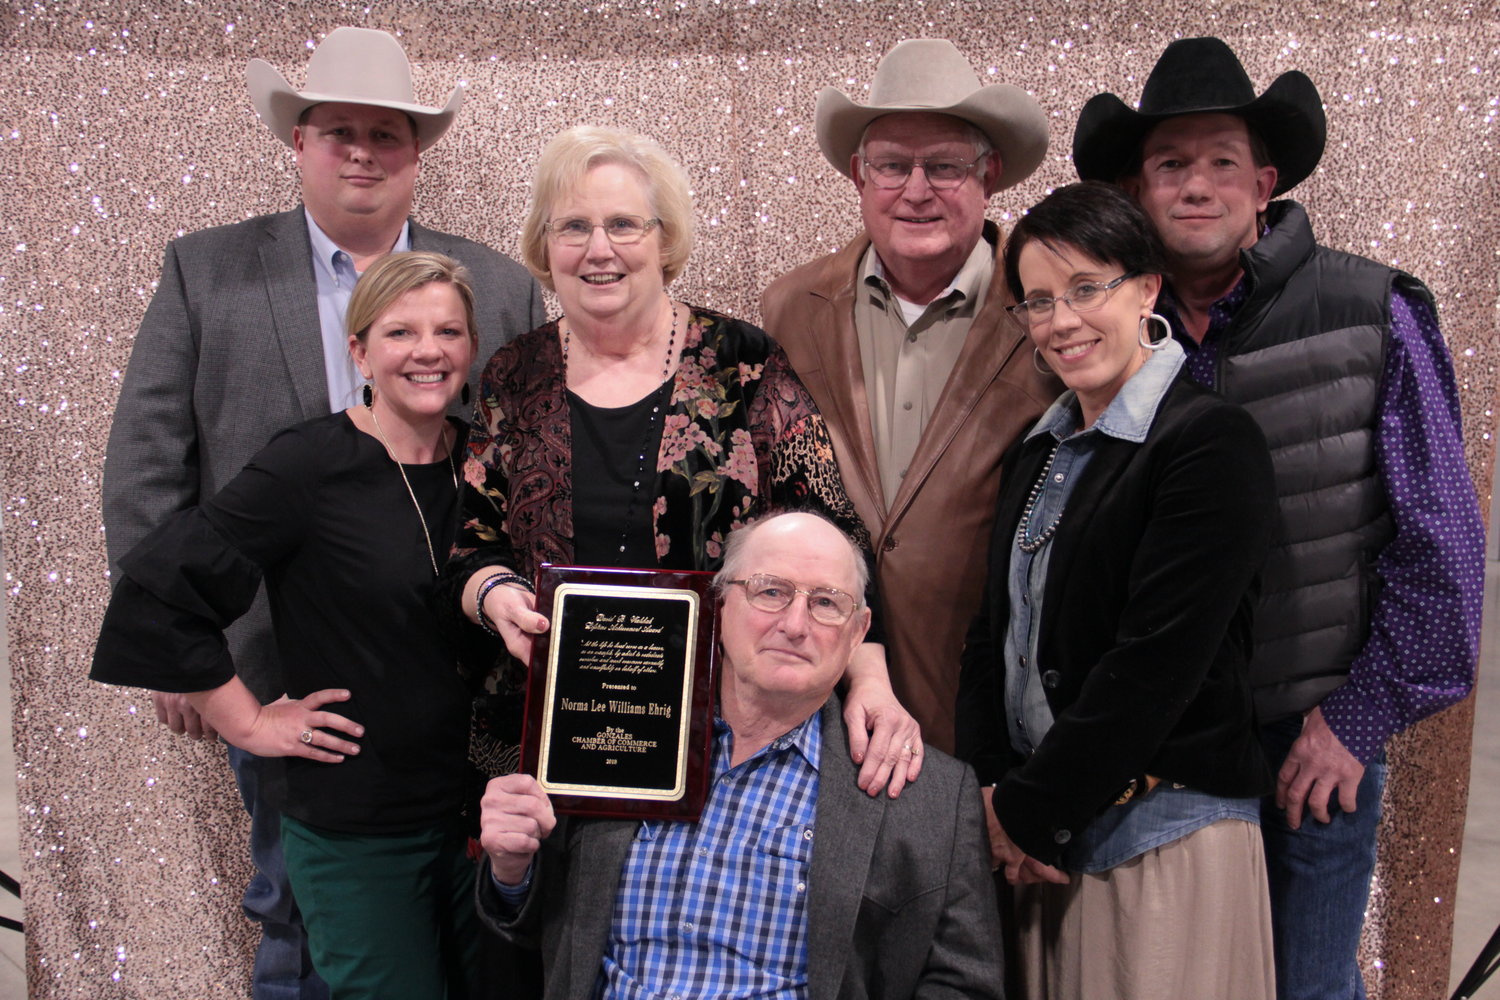 Norma Ehrig was chosen as this year's David B. Walshak Lifetime Achievement Award winner due to her extreme volunteer efforts in support of less-fortunate youth in Gonzales County. She celebrated the surprise occasion with her family by her side.